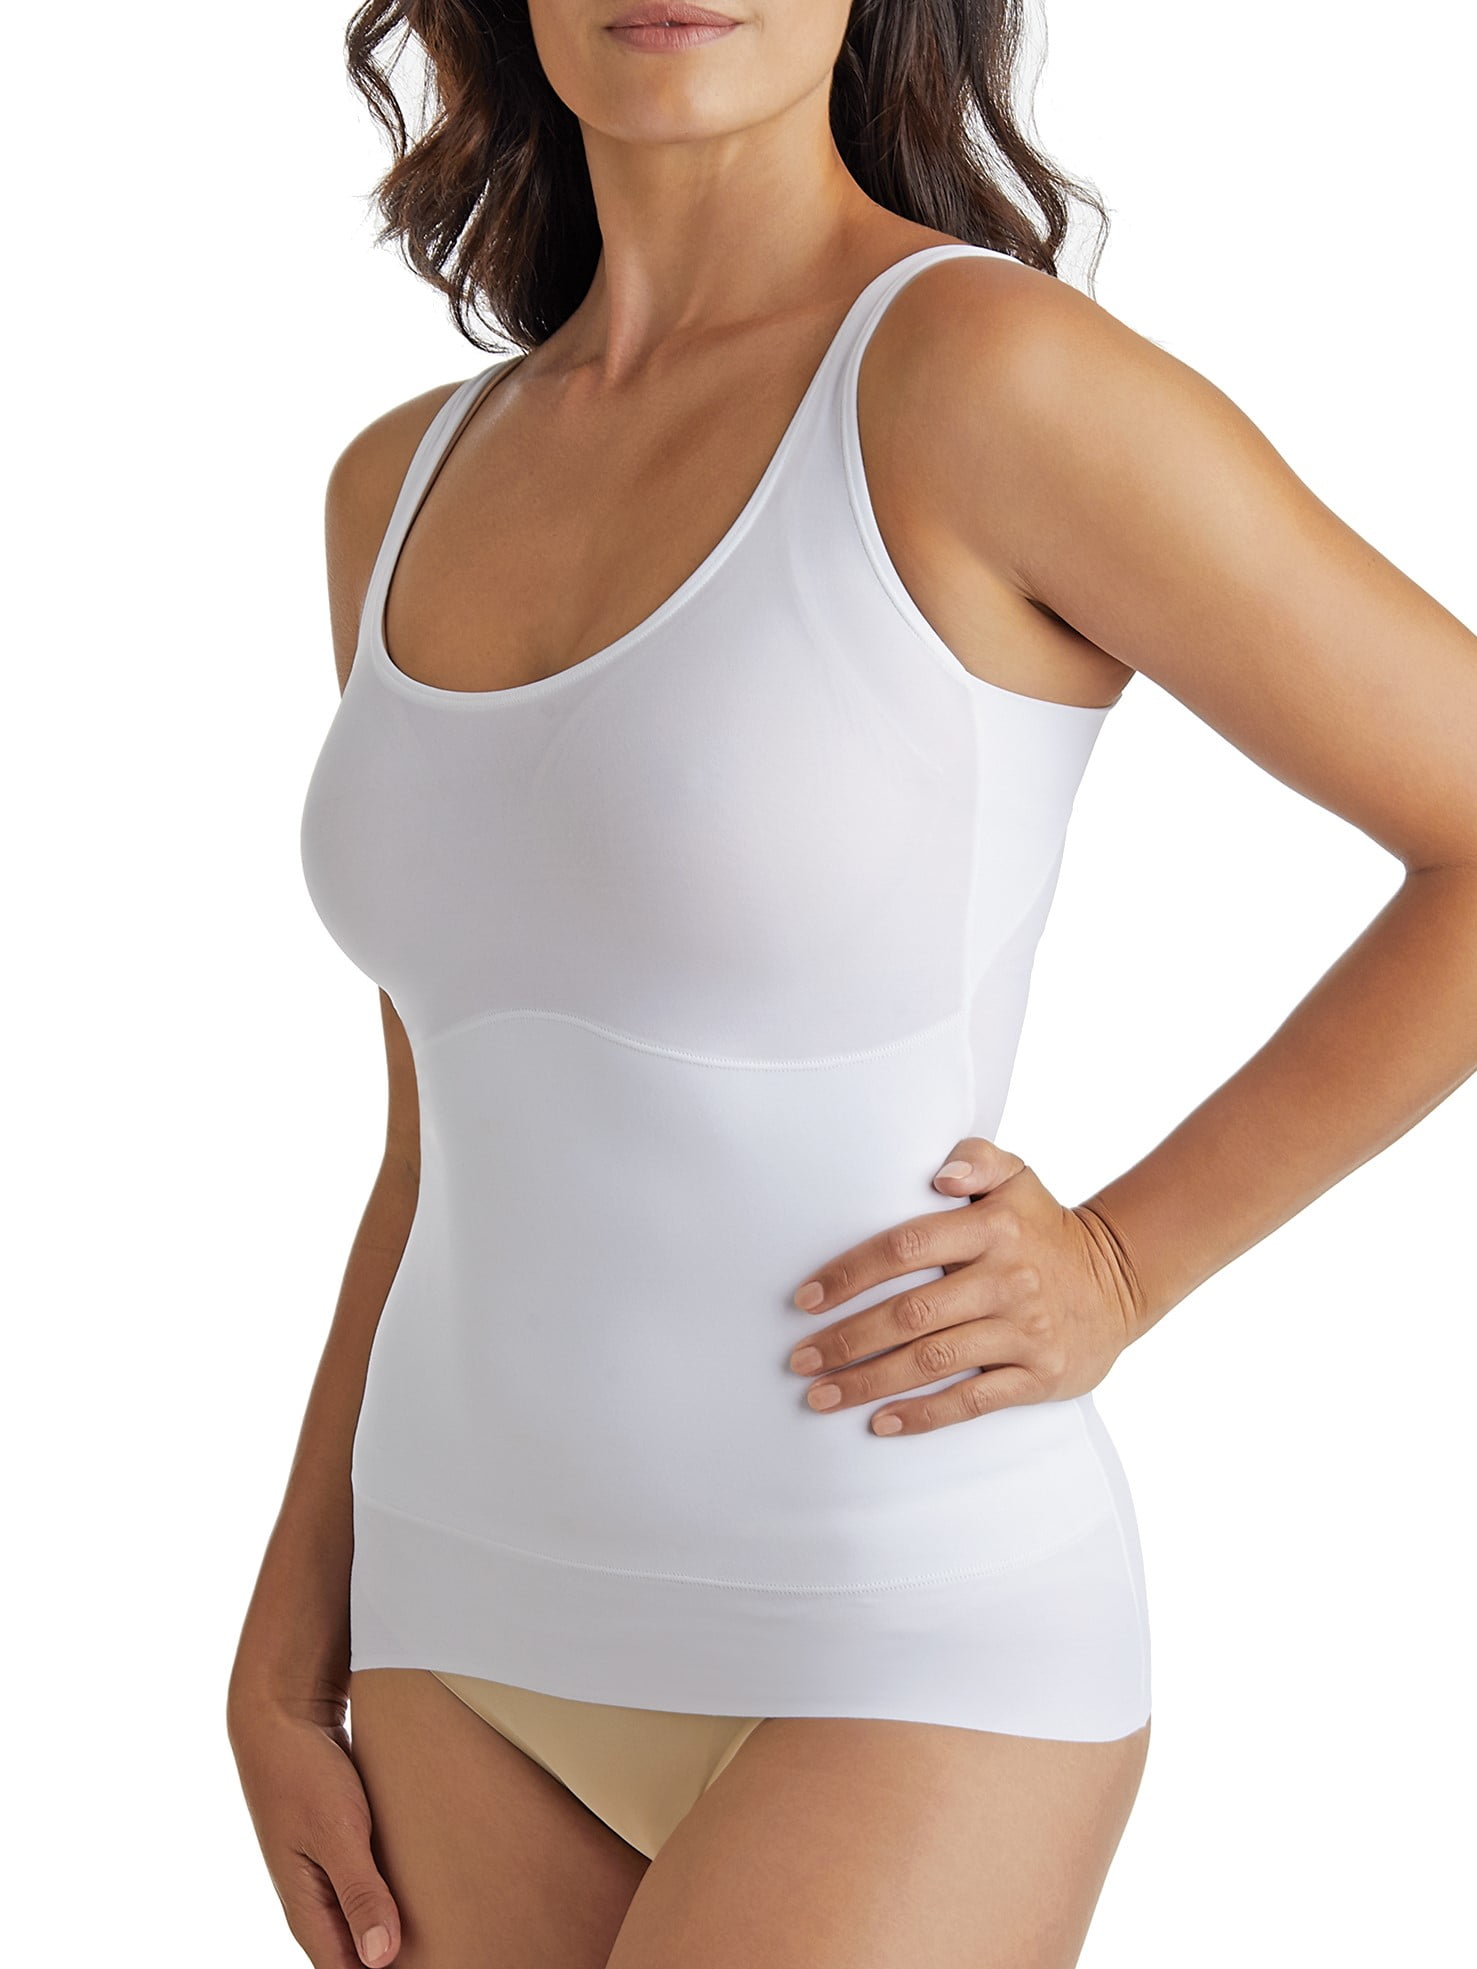 Cupid Firm Control Underarm Smoothing Camisole Shapewear (Women's